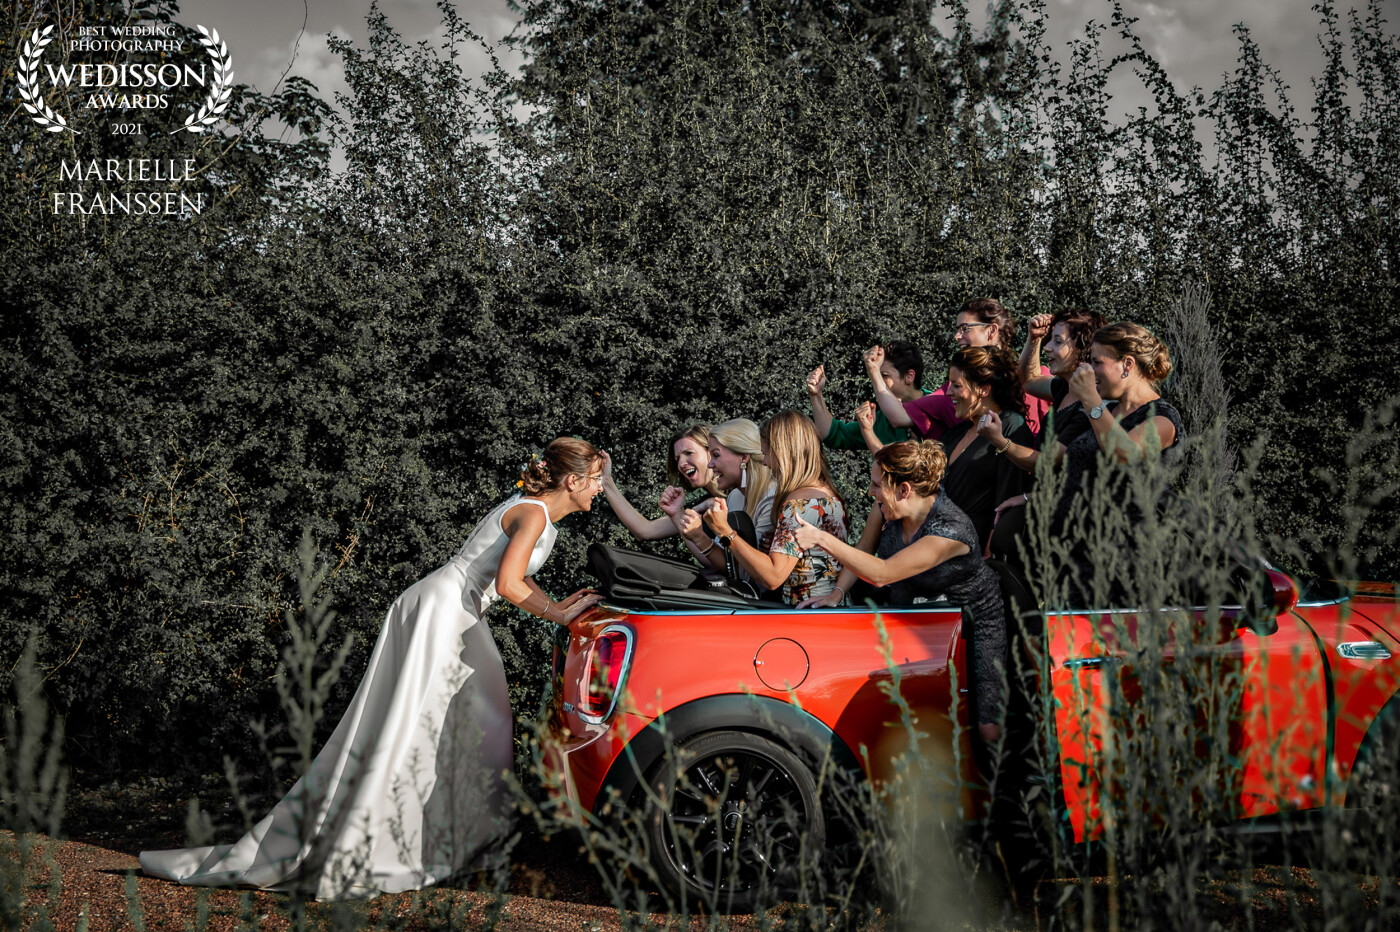 How many lovely ladies fit in a Mini? If you want your best friends at the party you have to put some effort in. No problem for this powerful bride. There's just one beautiful Mrs. who's got to take a walk to the wedding. Just a picture for fun, and it was absolutely such a funny moment.